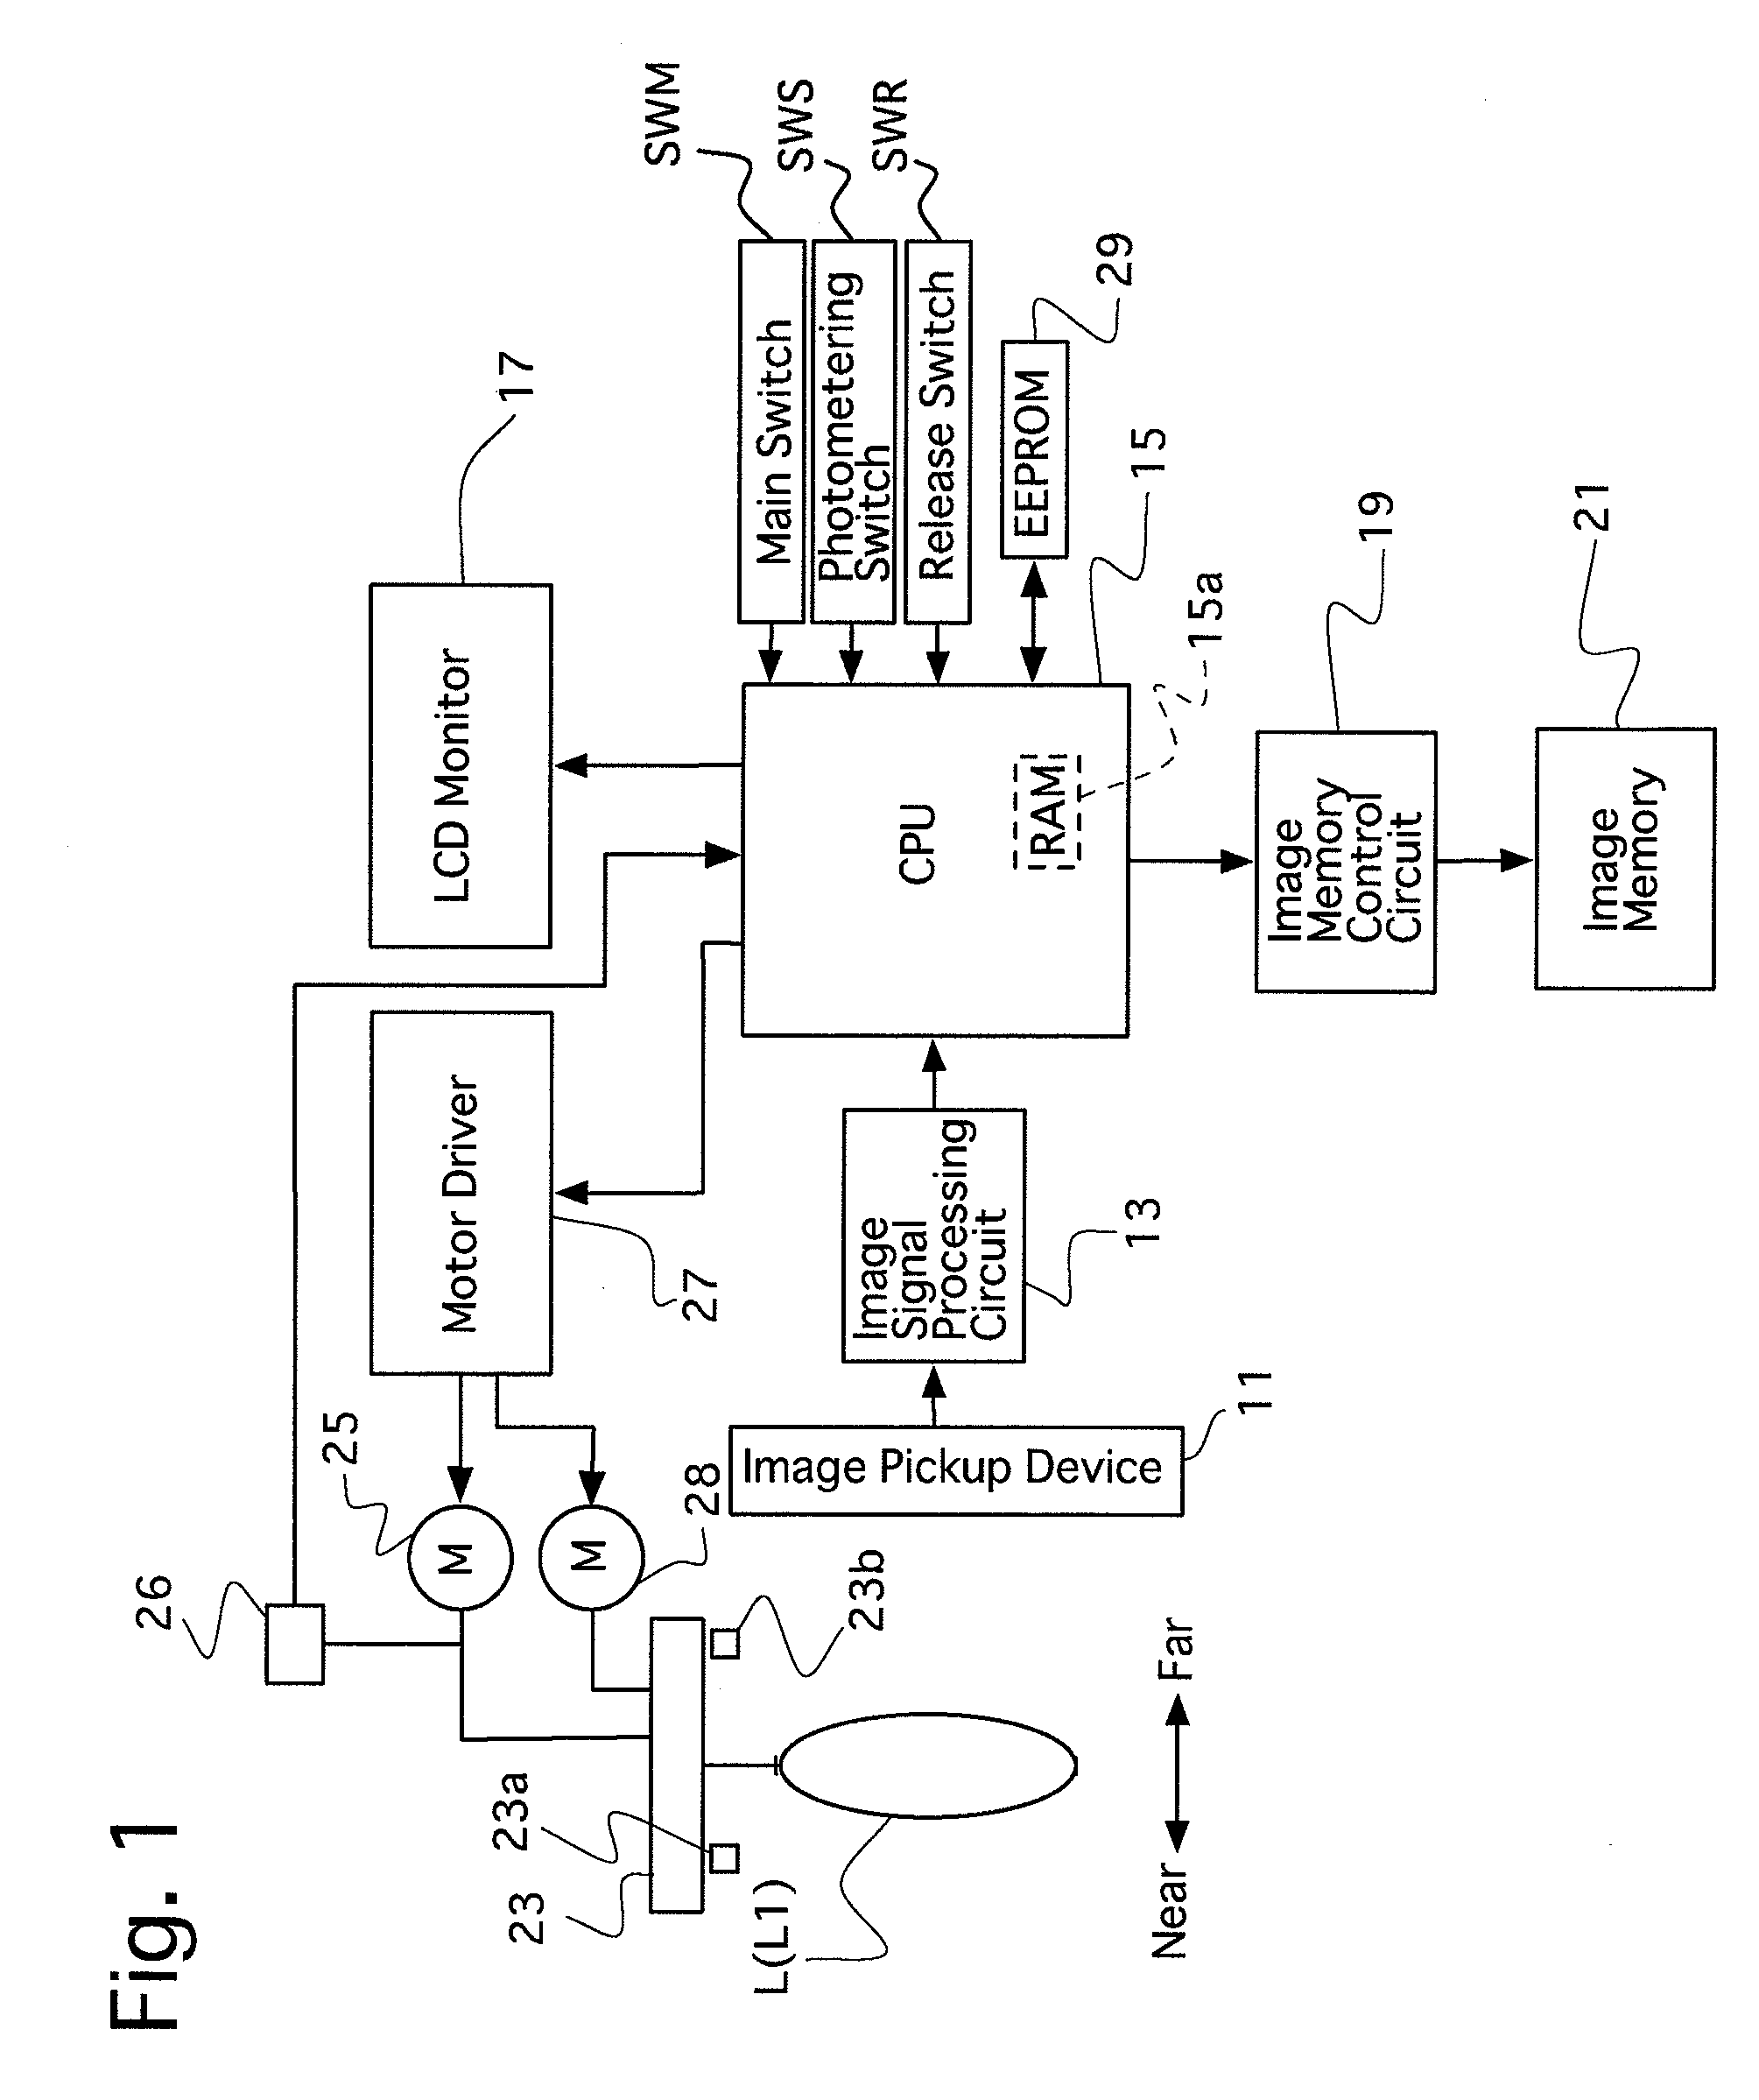 Camera having a focus adjusting system and a face recognition function